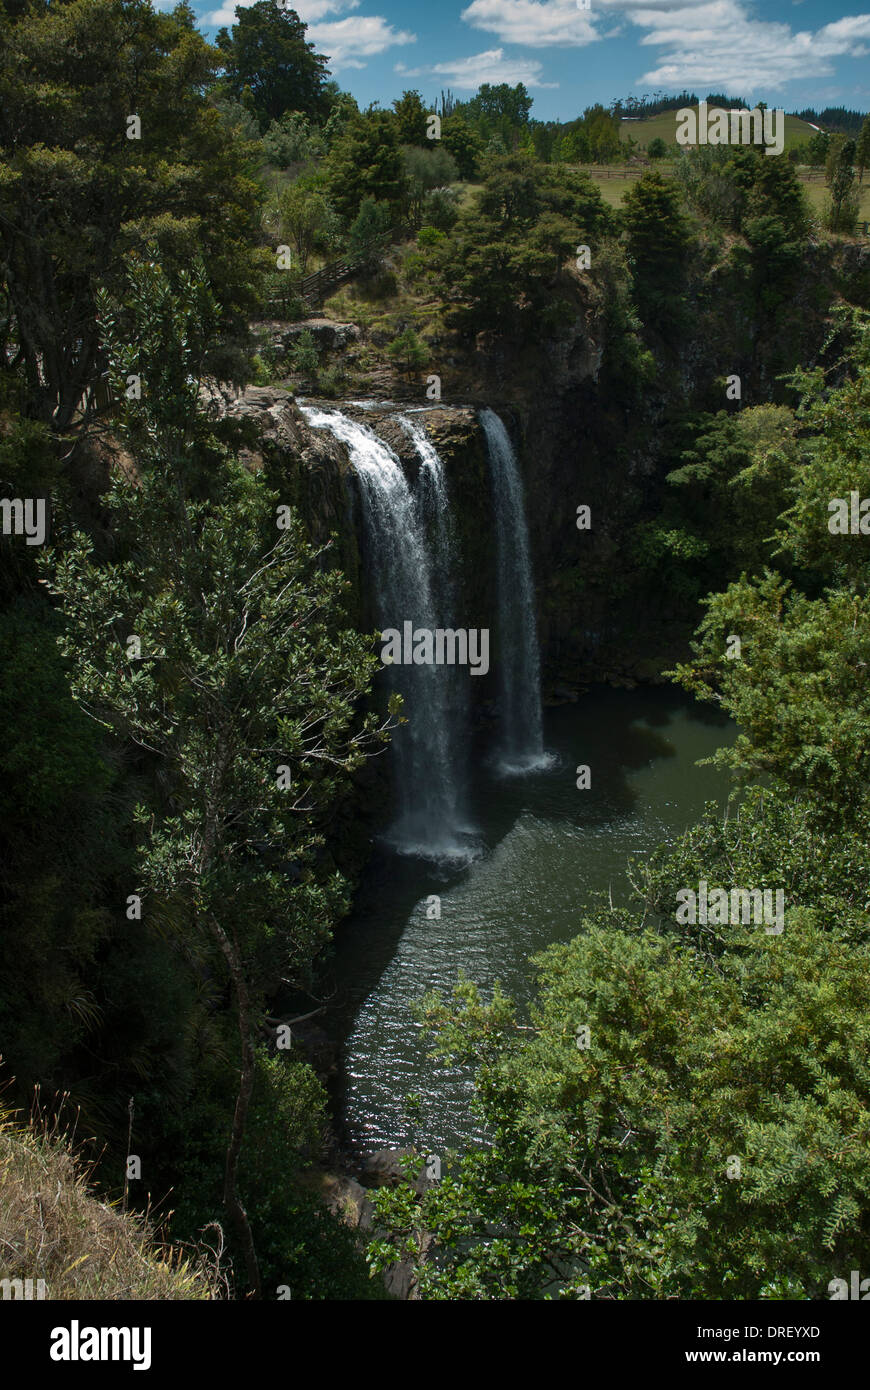 General view in sunshine with blue skies of the waterfall at Whangerai in North Island of New Zealand Stock Photo